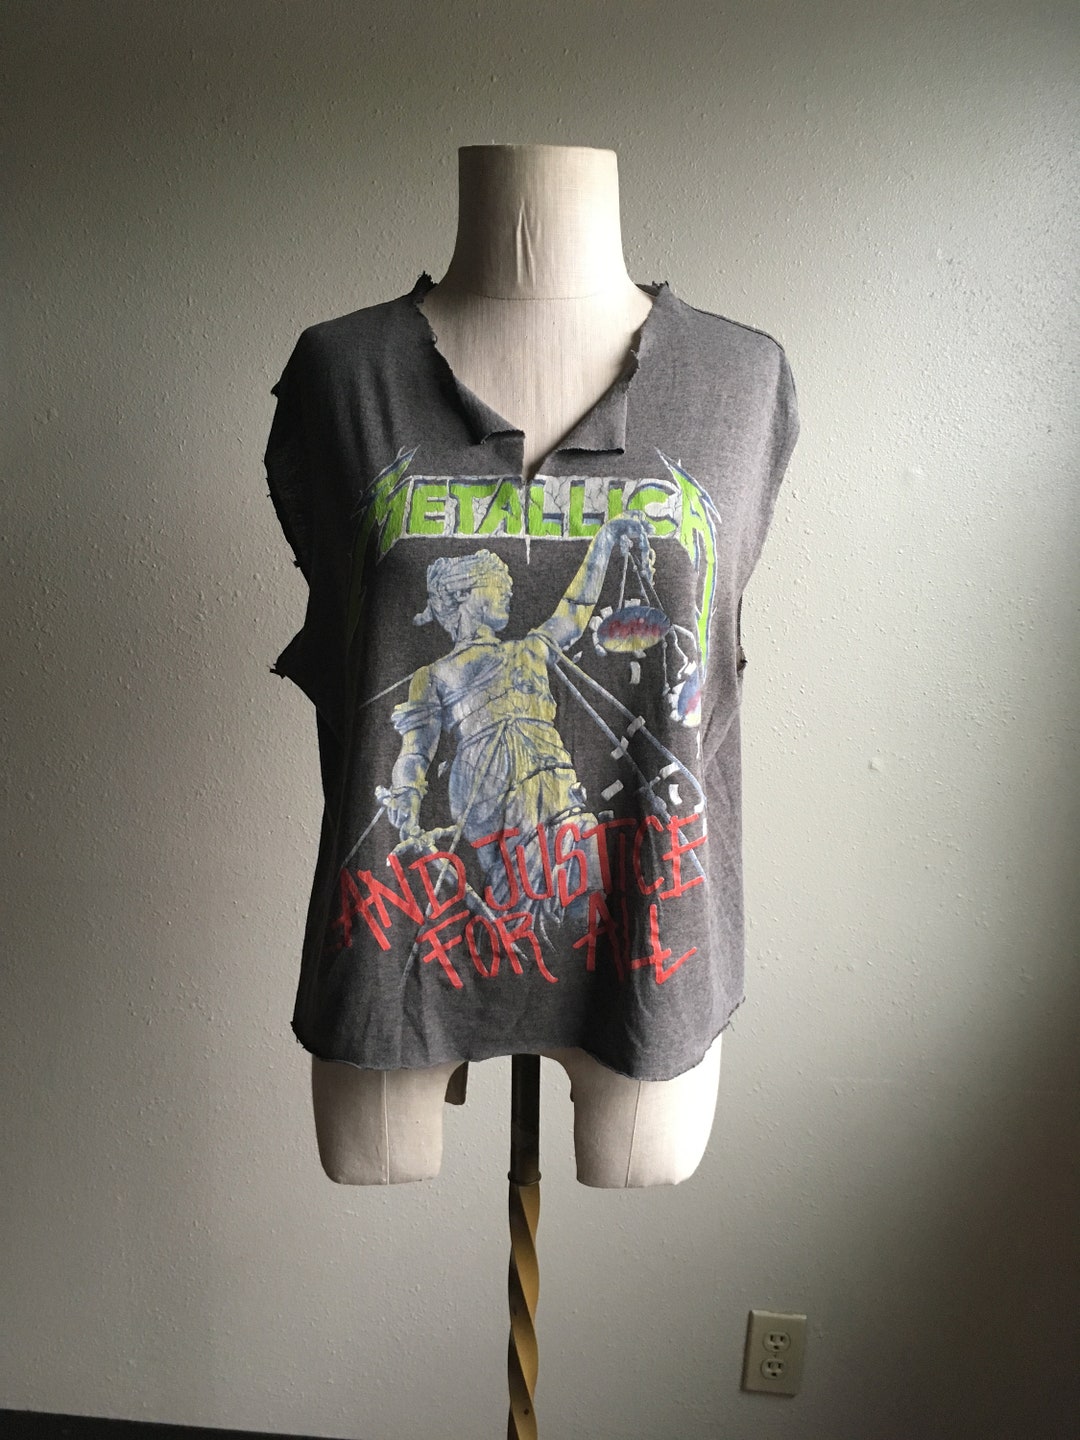 Vintage Metallica And Justice For All T Shirt 1988 for Sale in San